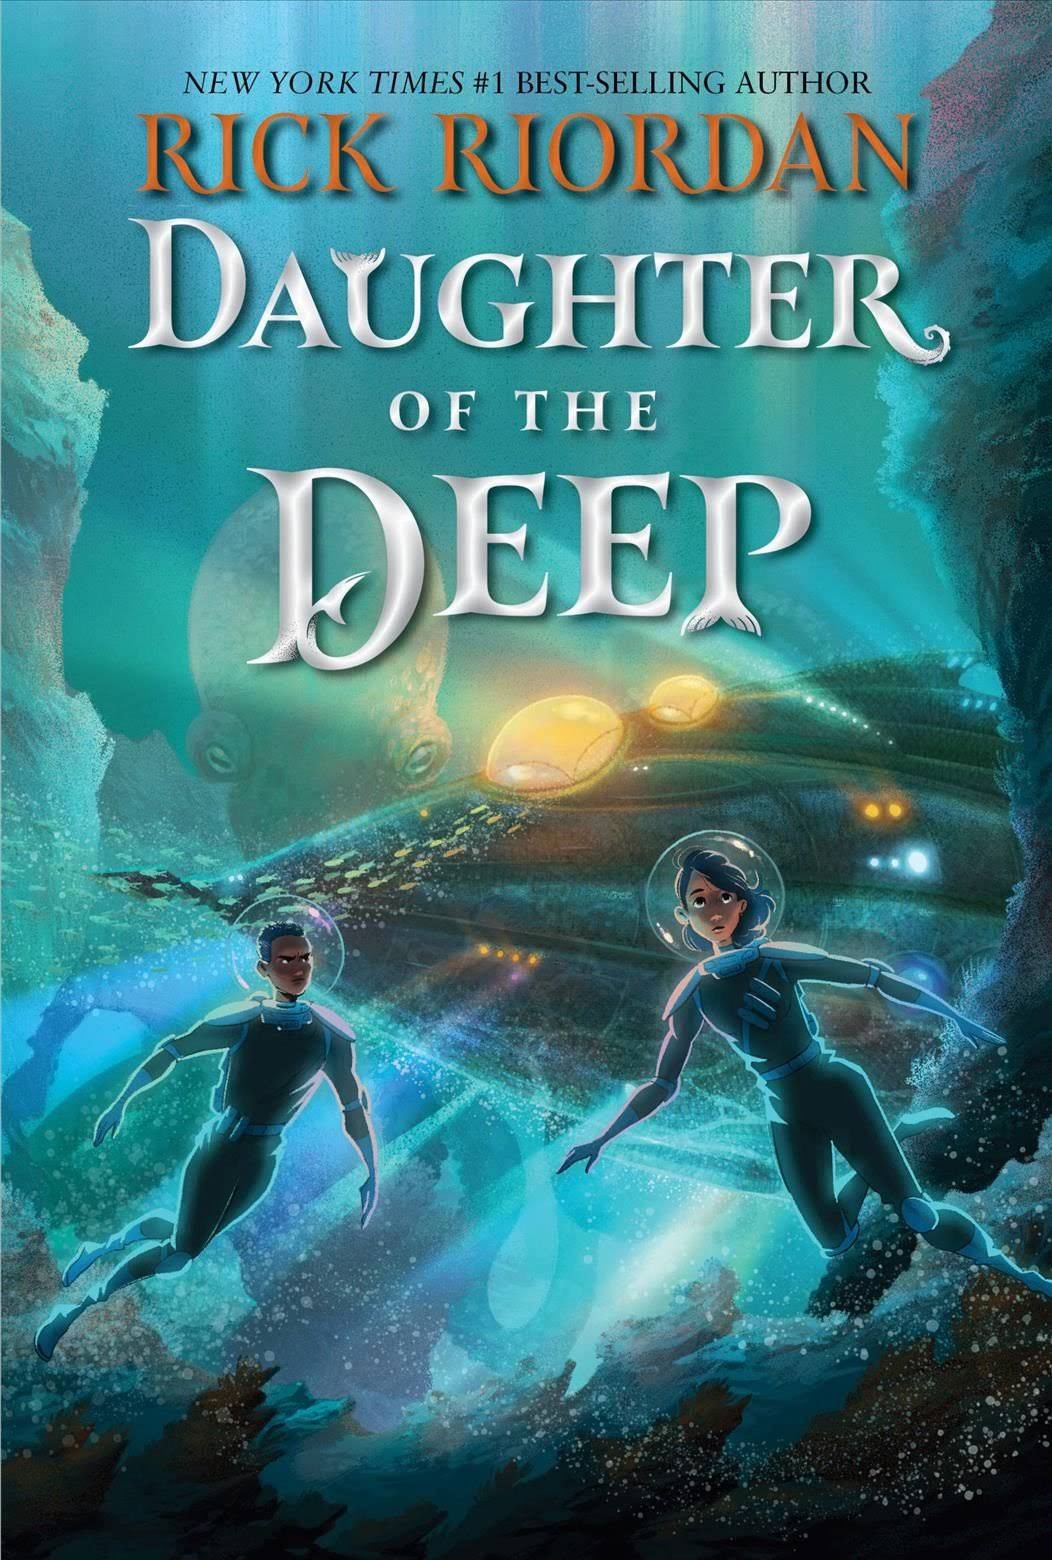 Daughter of the Deep [Book]